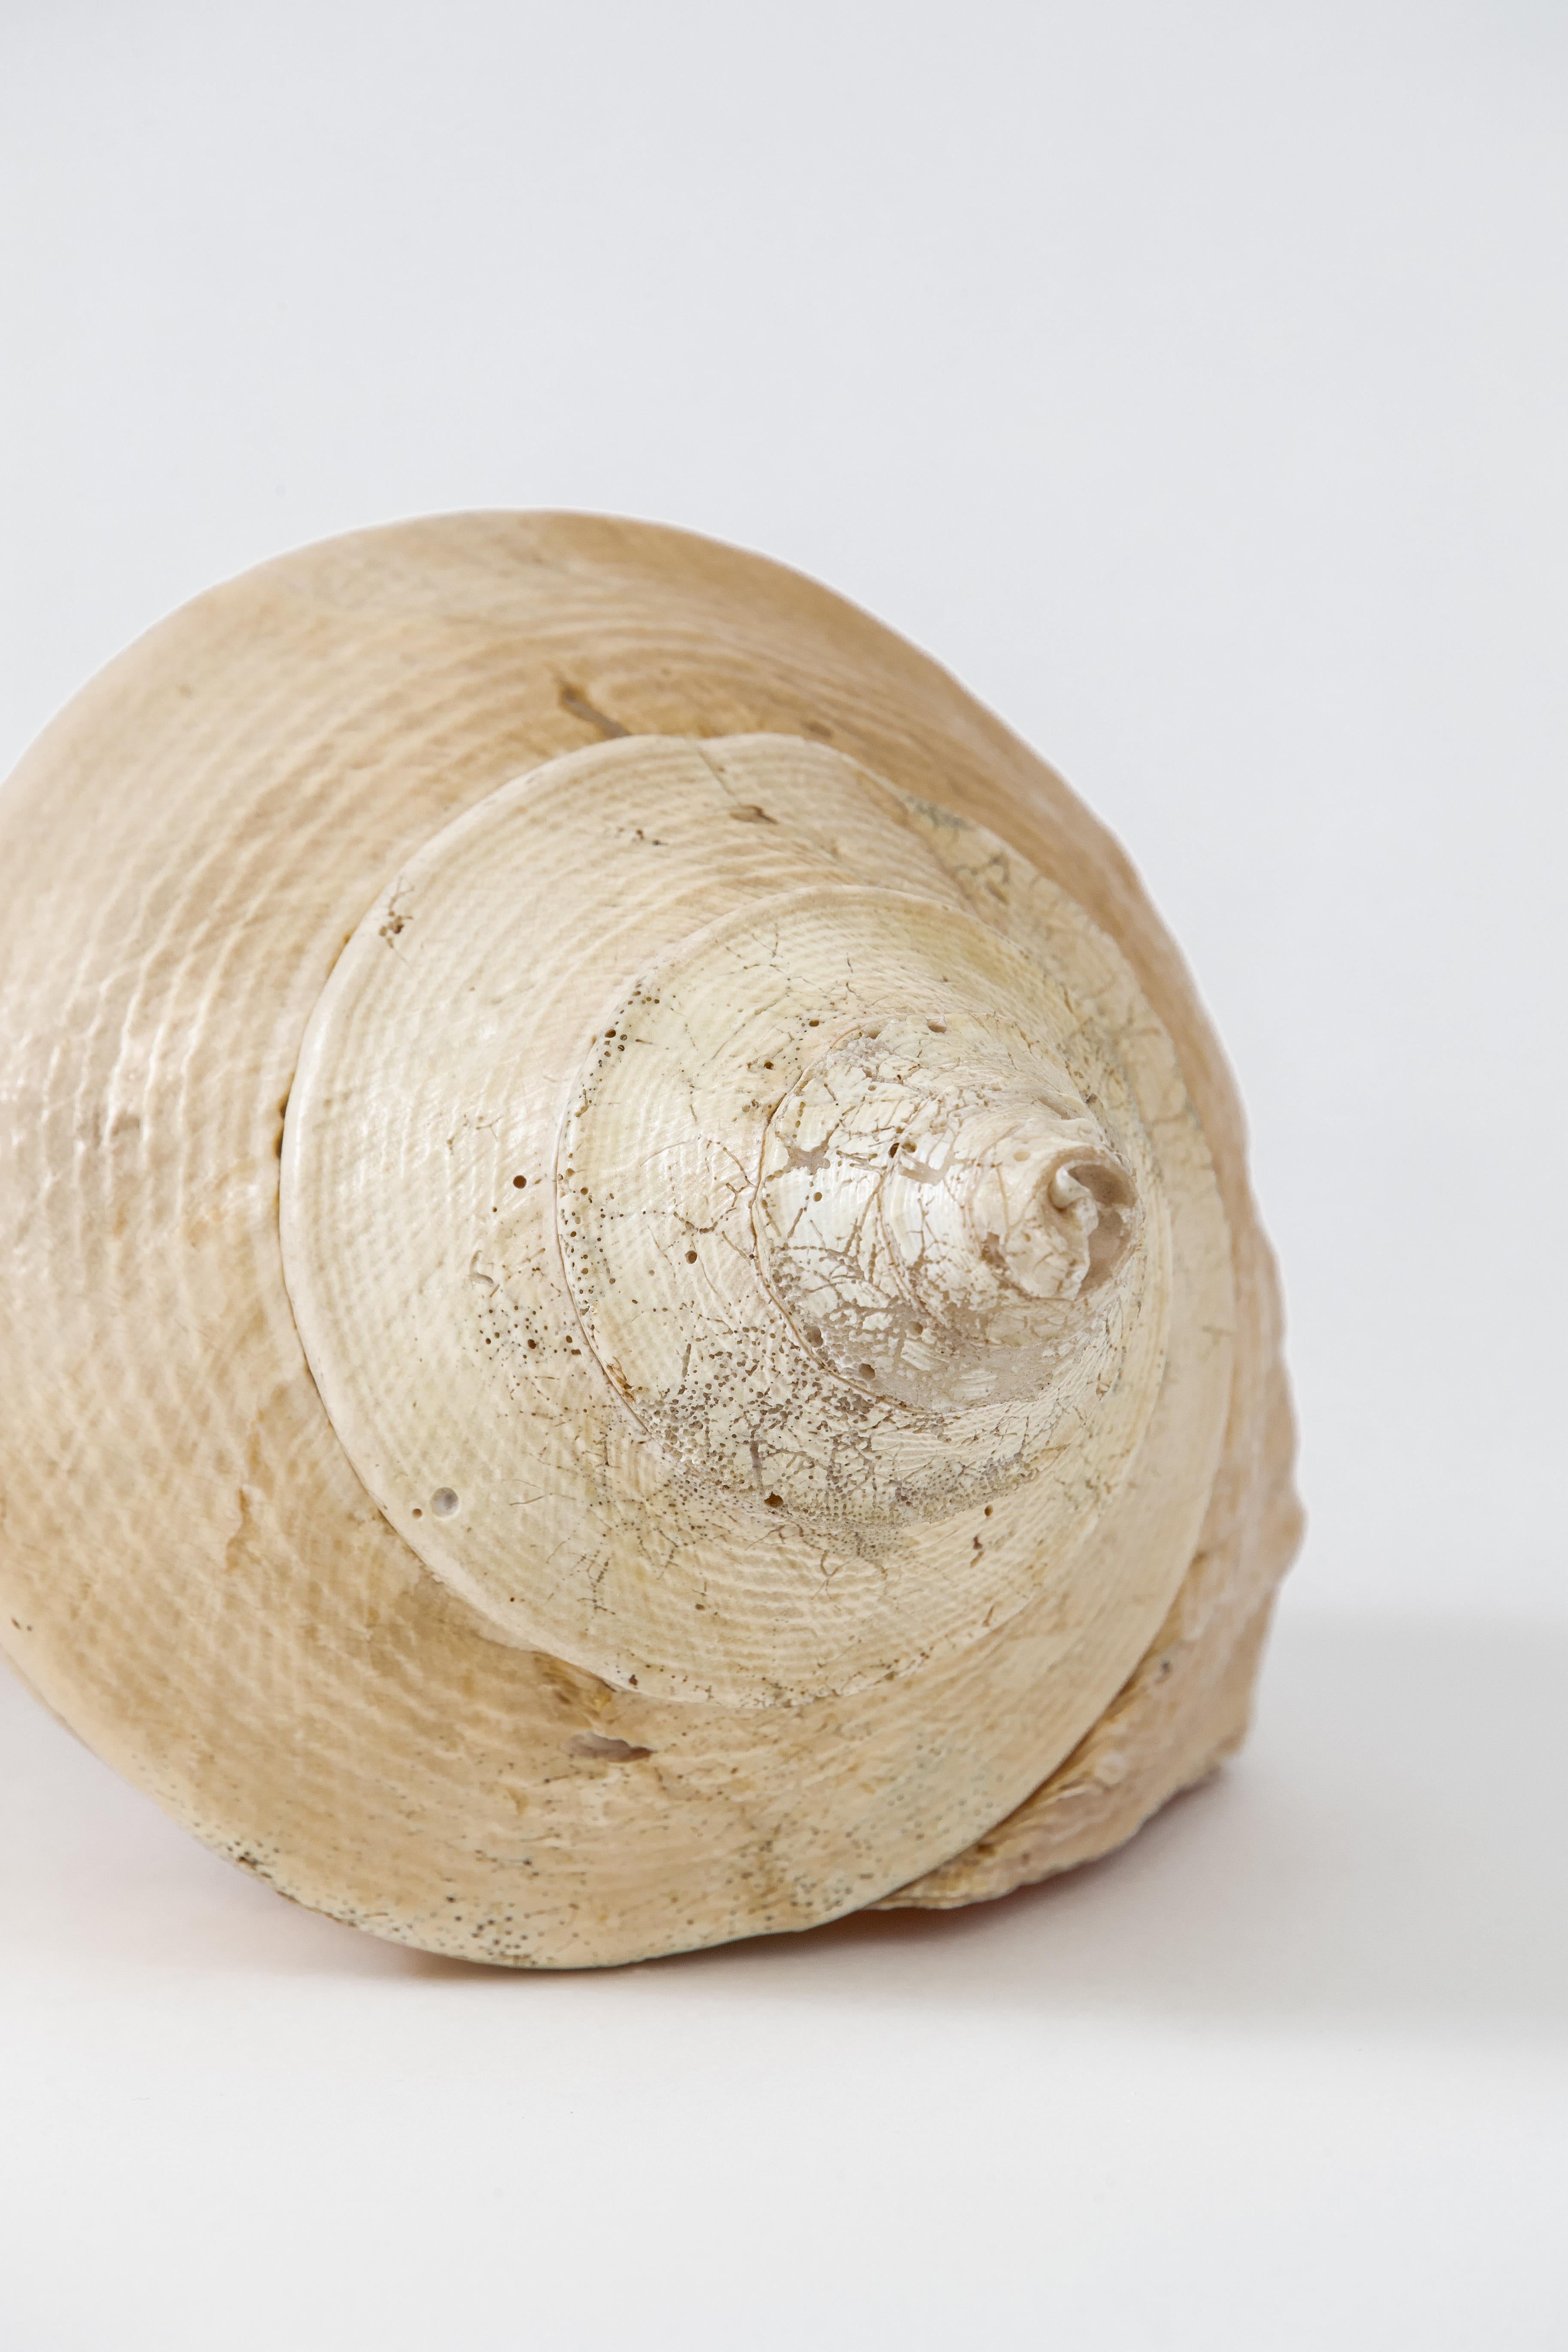 conch shell price